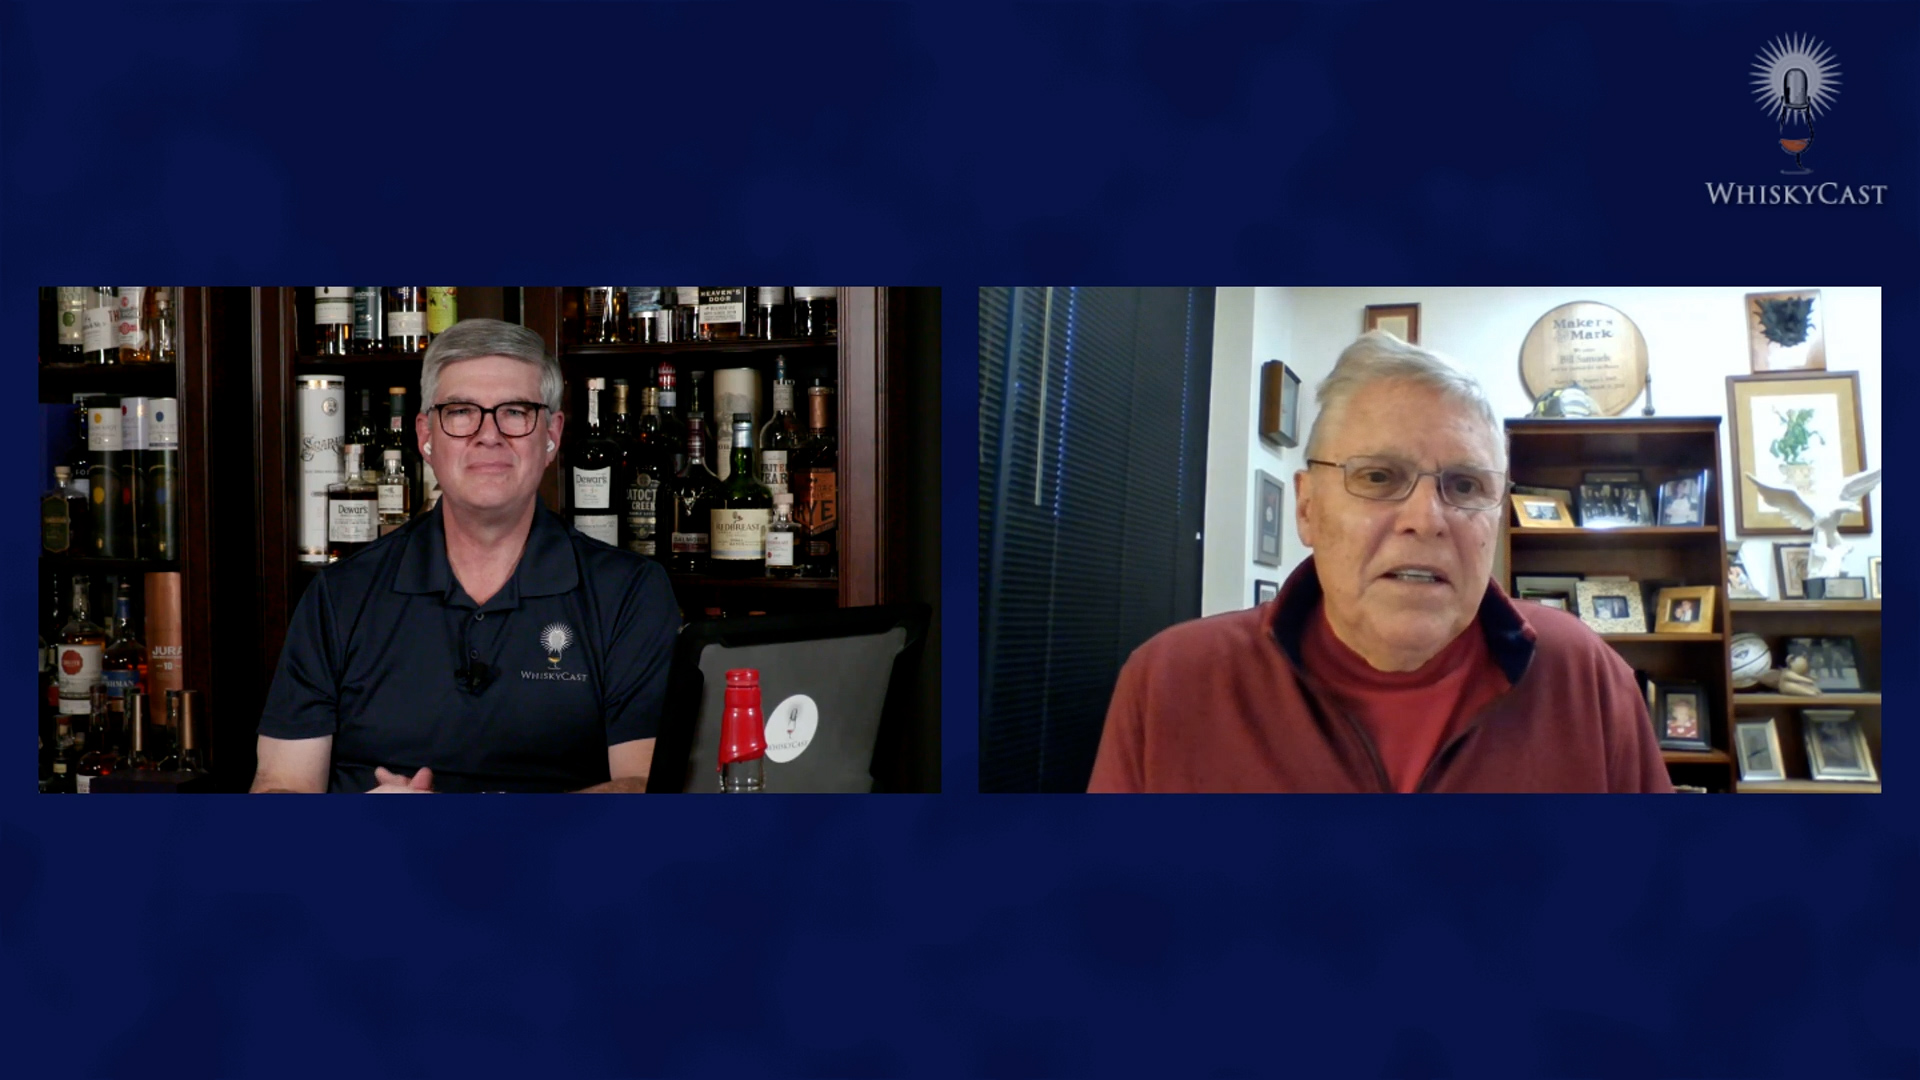 Maker's Mark Chairman Emeritus Bill Samuels Jr. joined us on Friday night's #HappyHourLive webcast. The on-demand replay is available now on the WhiskyCast YouTube channel, and the podcast version will be out later this week.